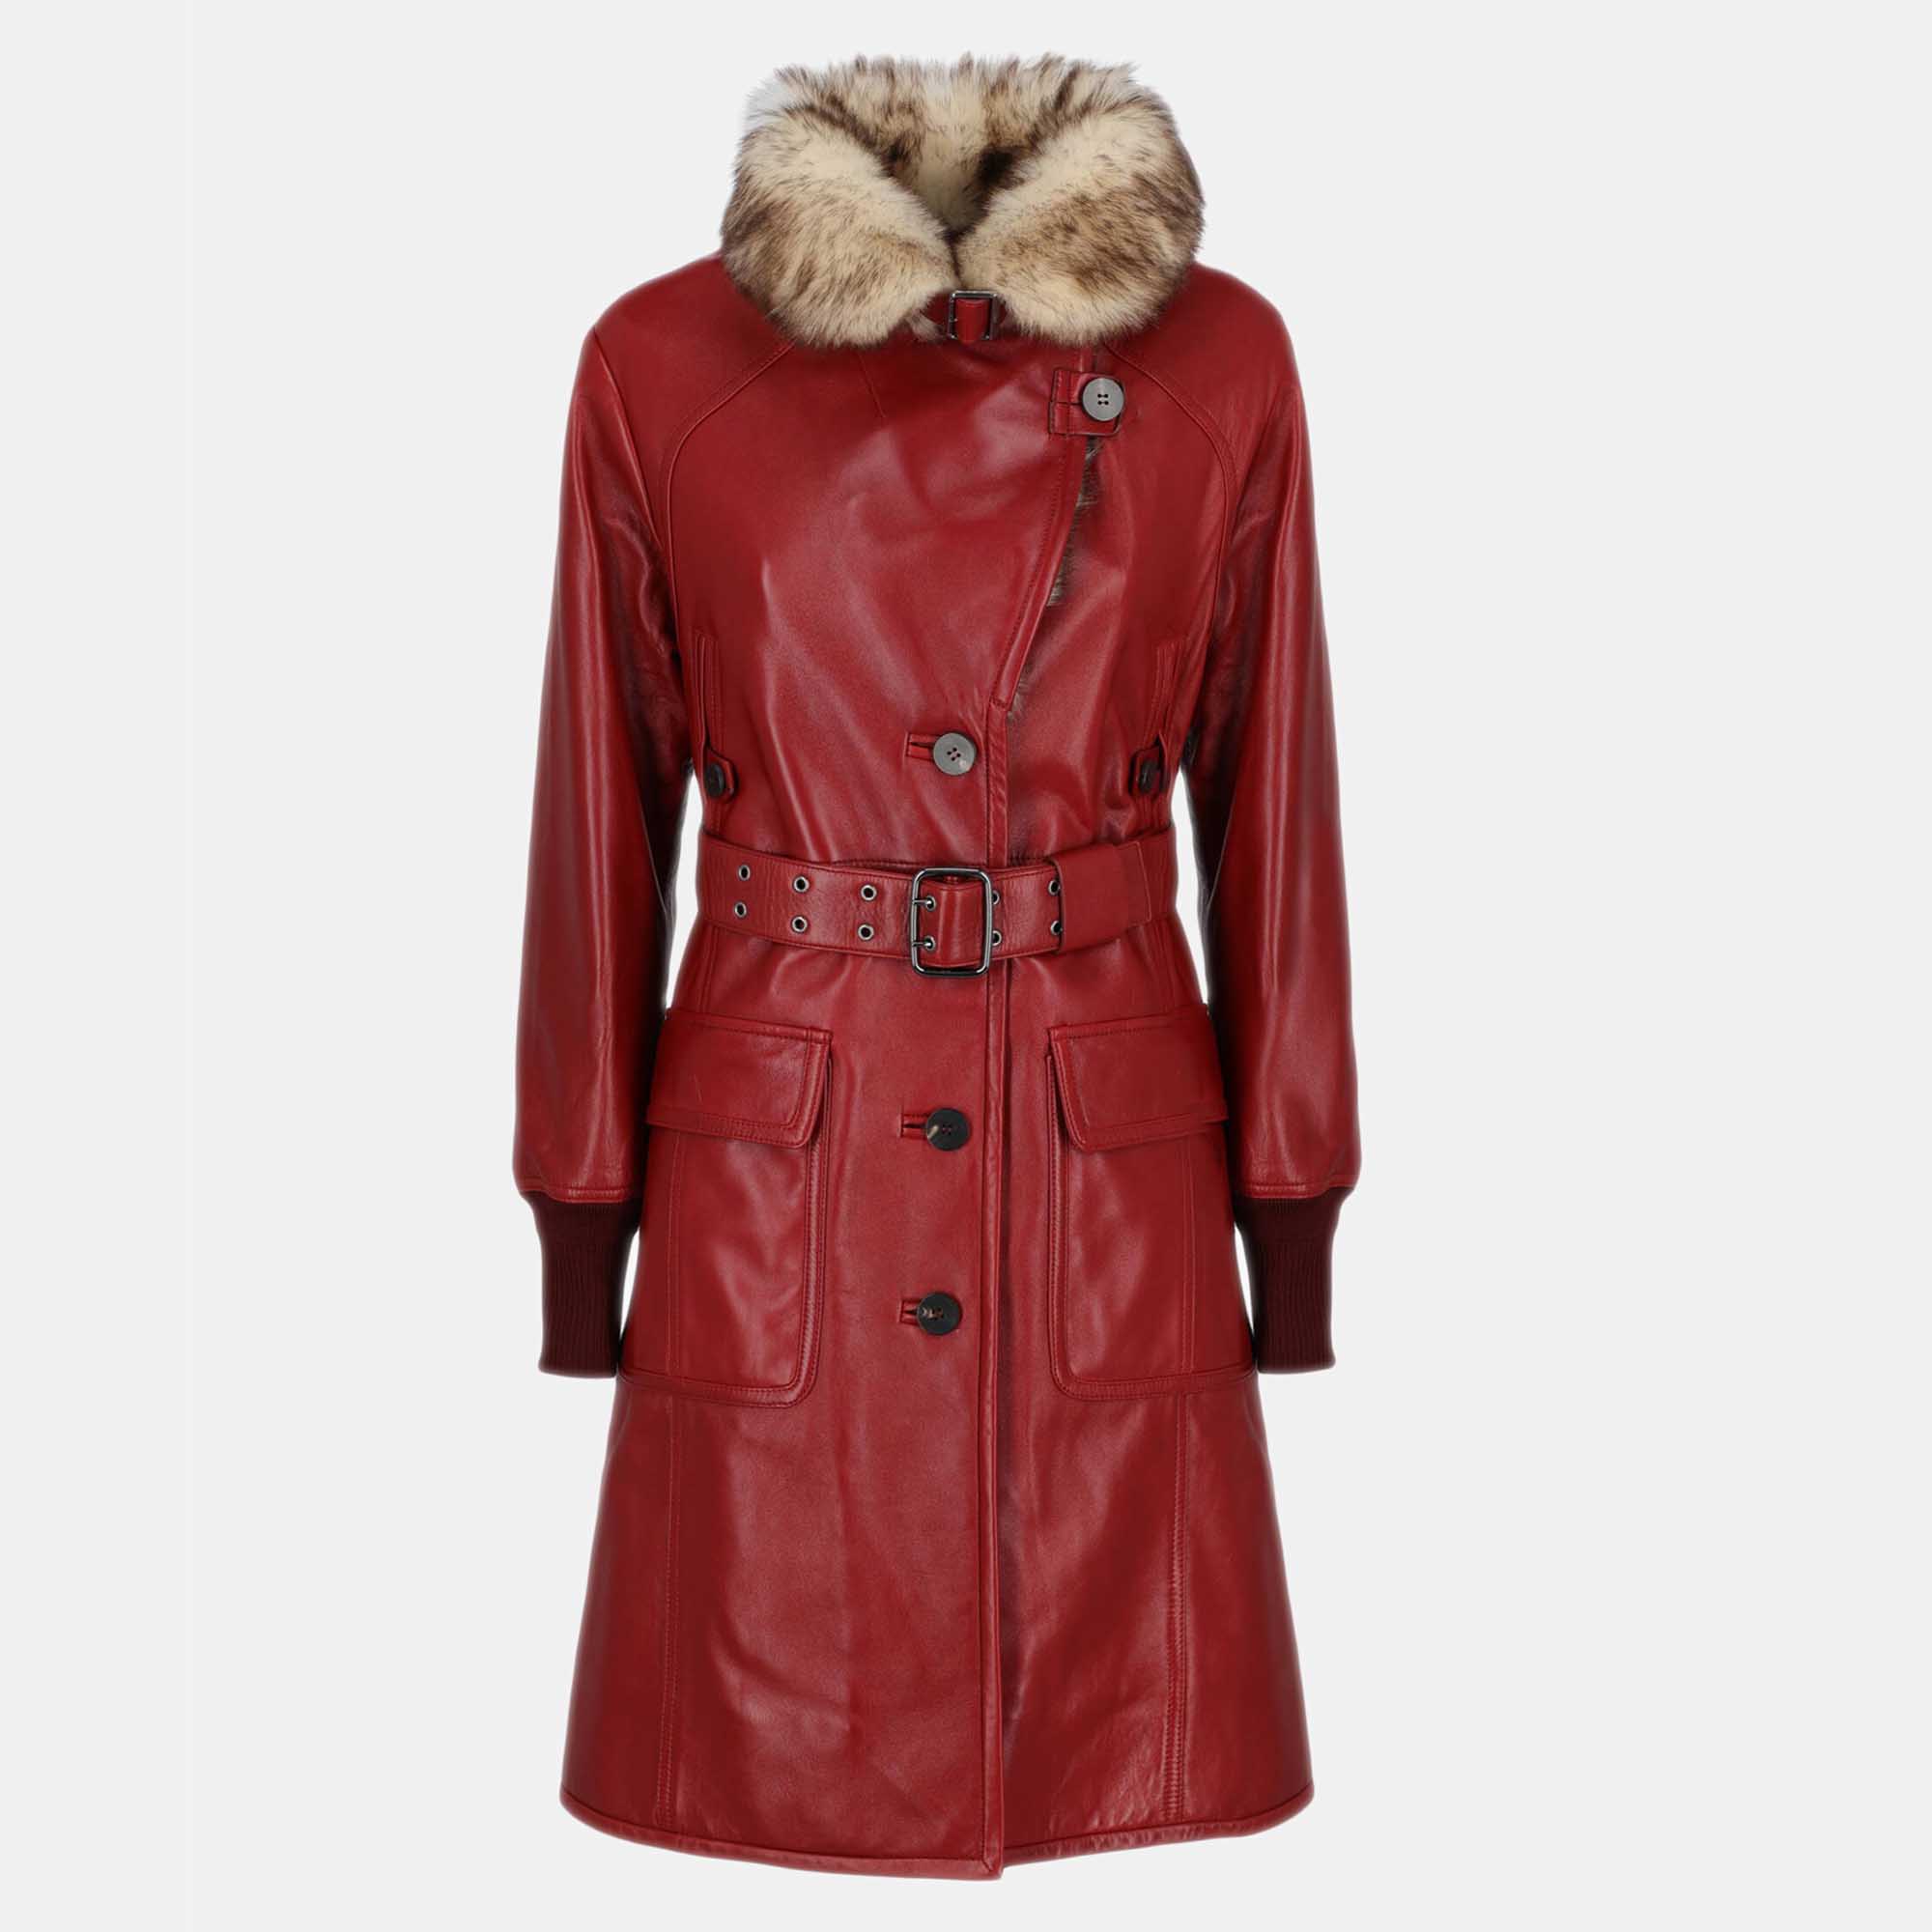 Chloe  Women's Leather Single Breasted Coat - Red - S